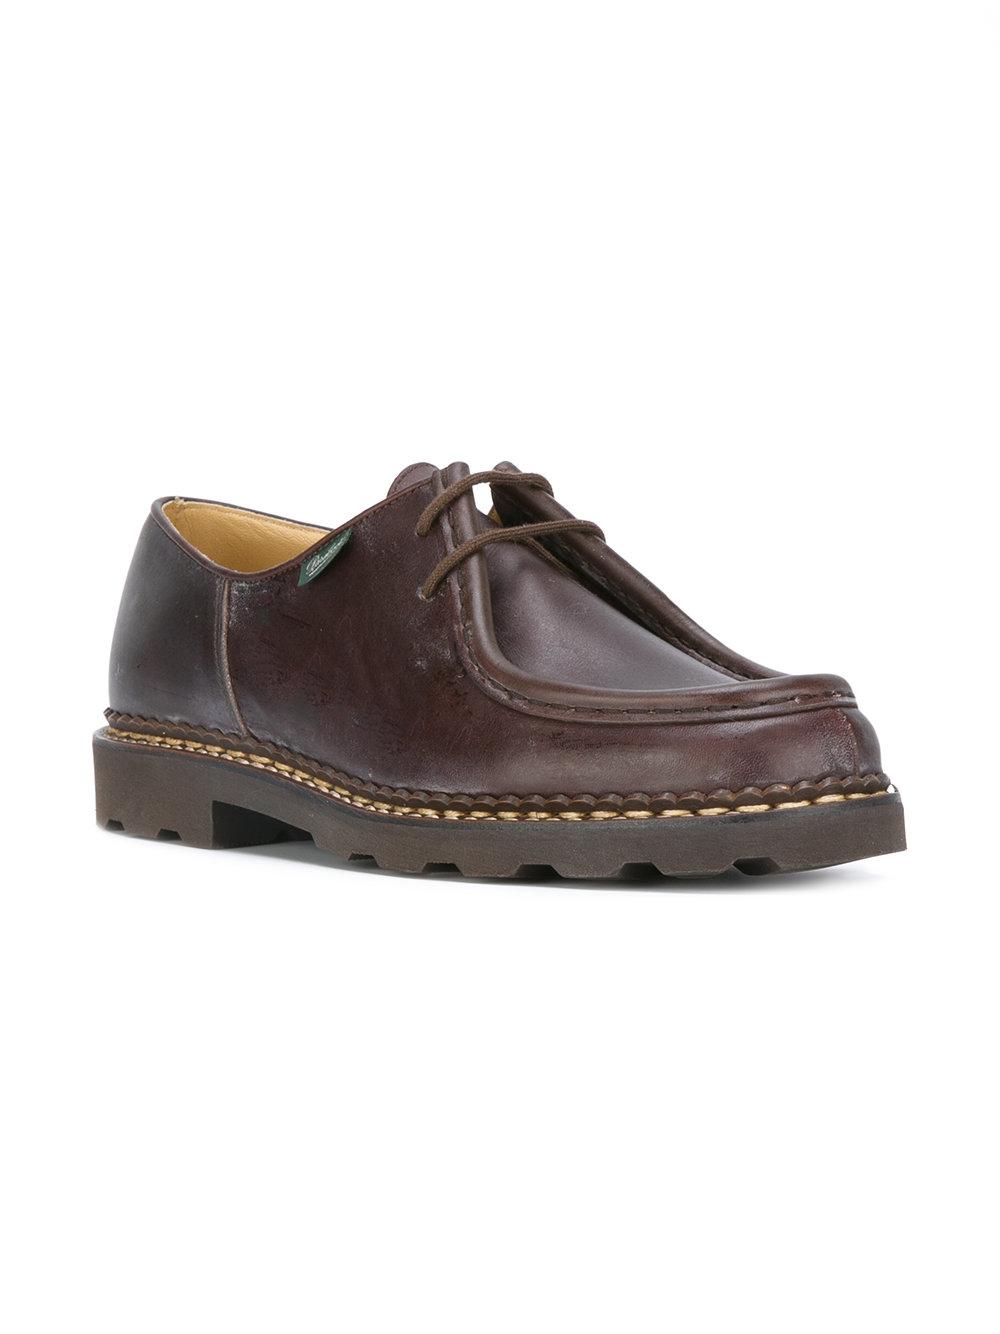 Lyst - Paraboot 'michael Caffe' Shoes in Brown for Men